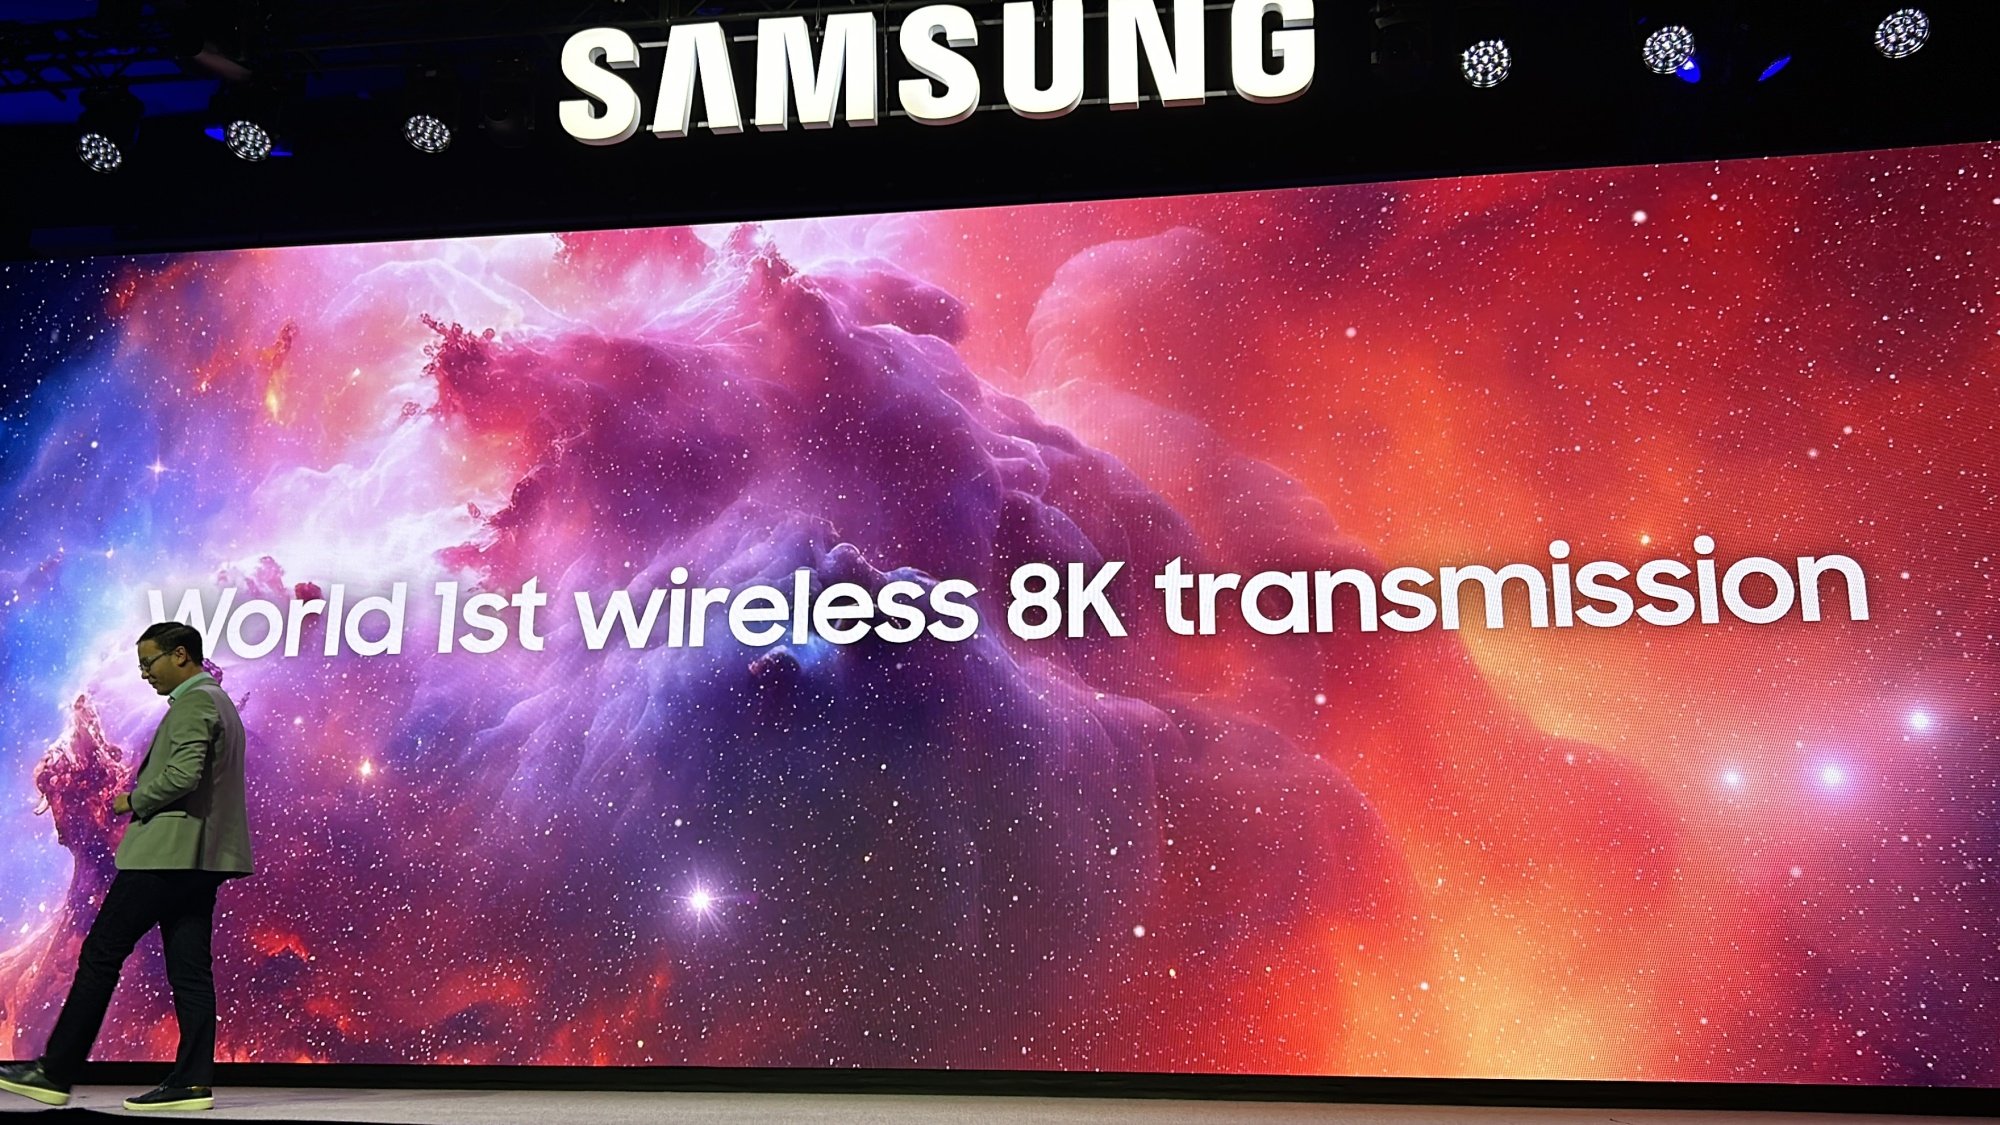 8K projector at Samsung Press Release